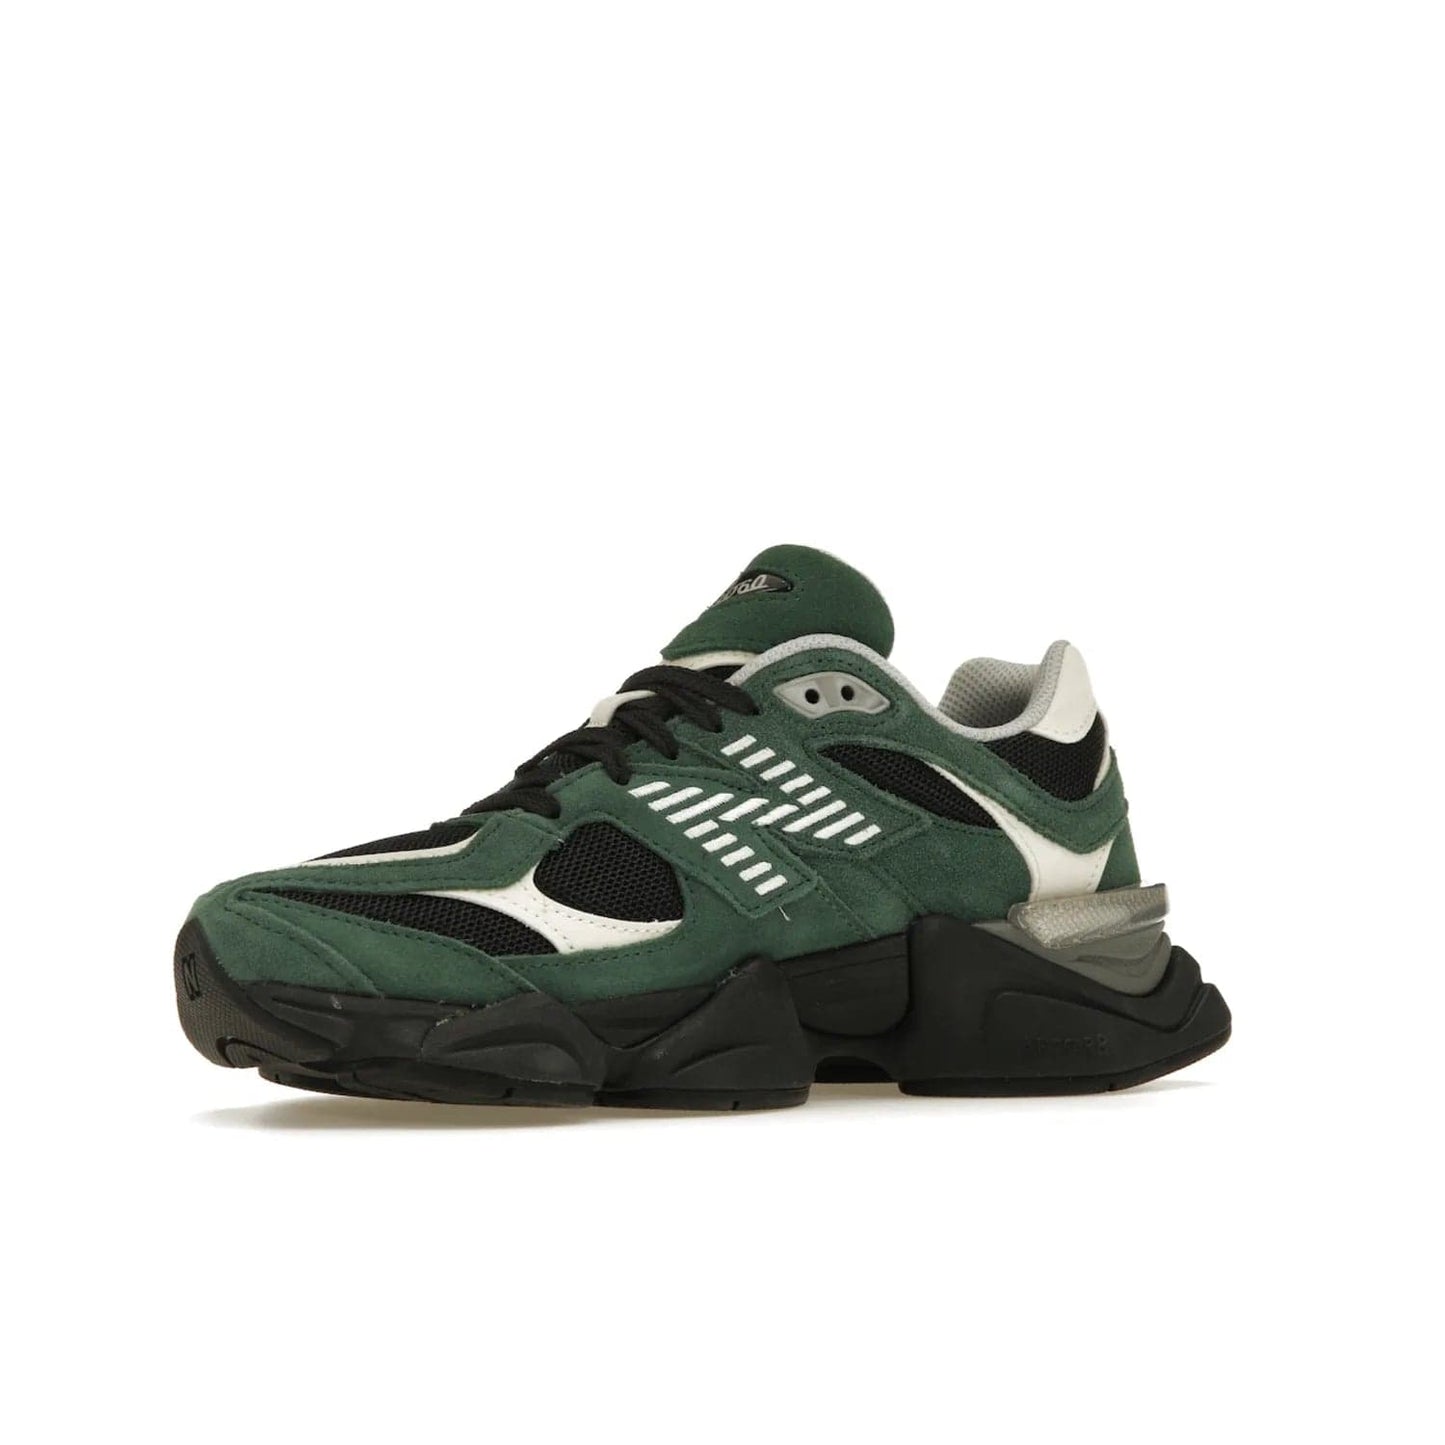 New Balance 9060 Team Forest Green - Image 16 - Only at www.BallersClubKickz.com - Introducing the New Balance 9060 Team Forest Green! Durable statement sneaker with a vibrant forest green upper and contrast detailing. Release date 2023-04-04 - don't miss out!